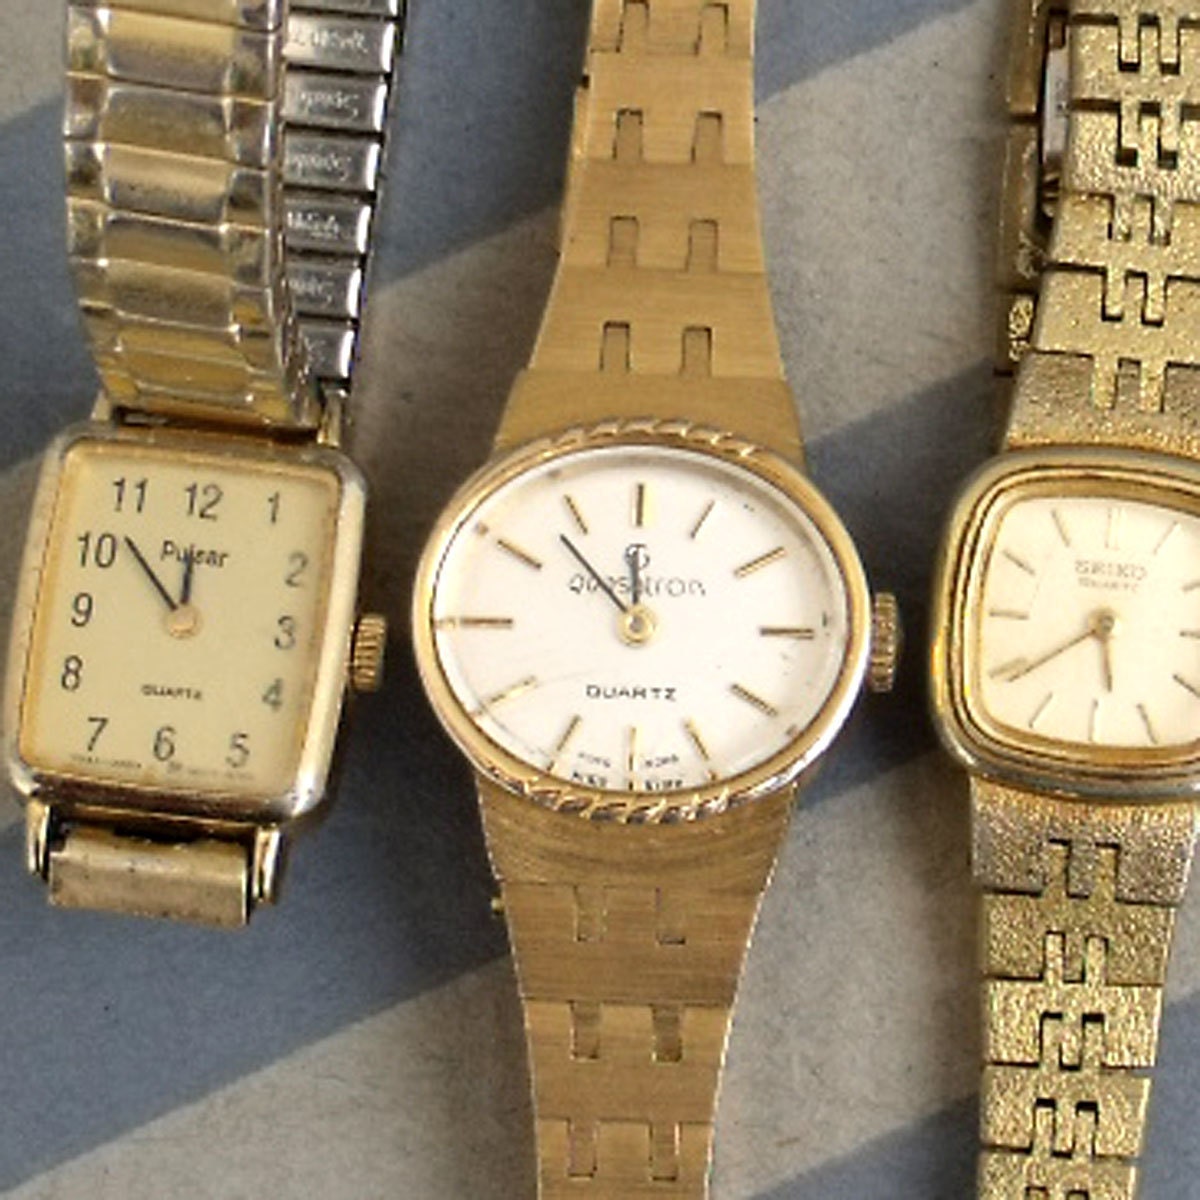 Vintage PULSAR Seiko ladies watches for by HelenaAleixoGlamour